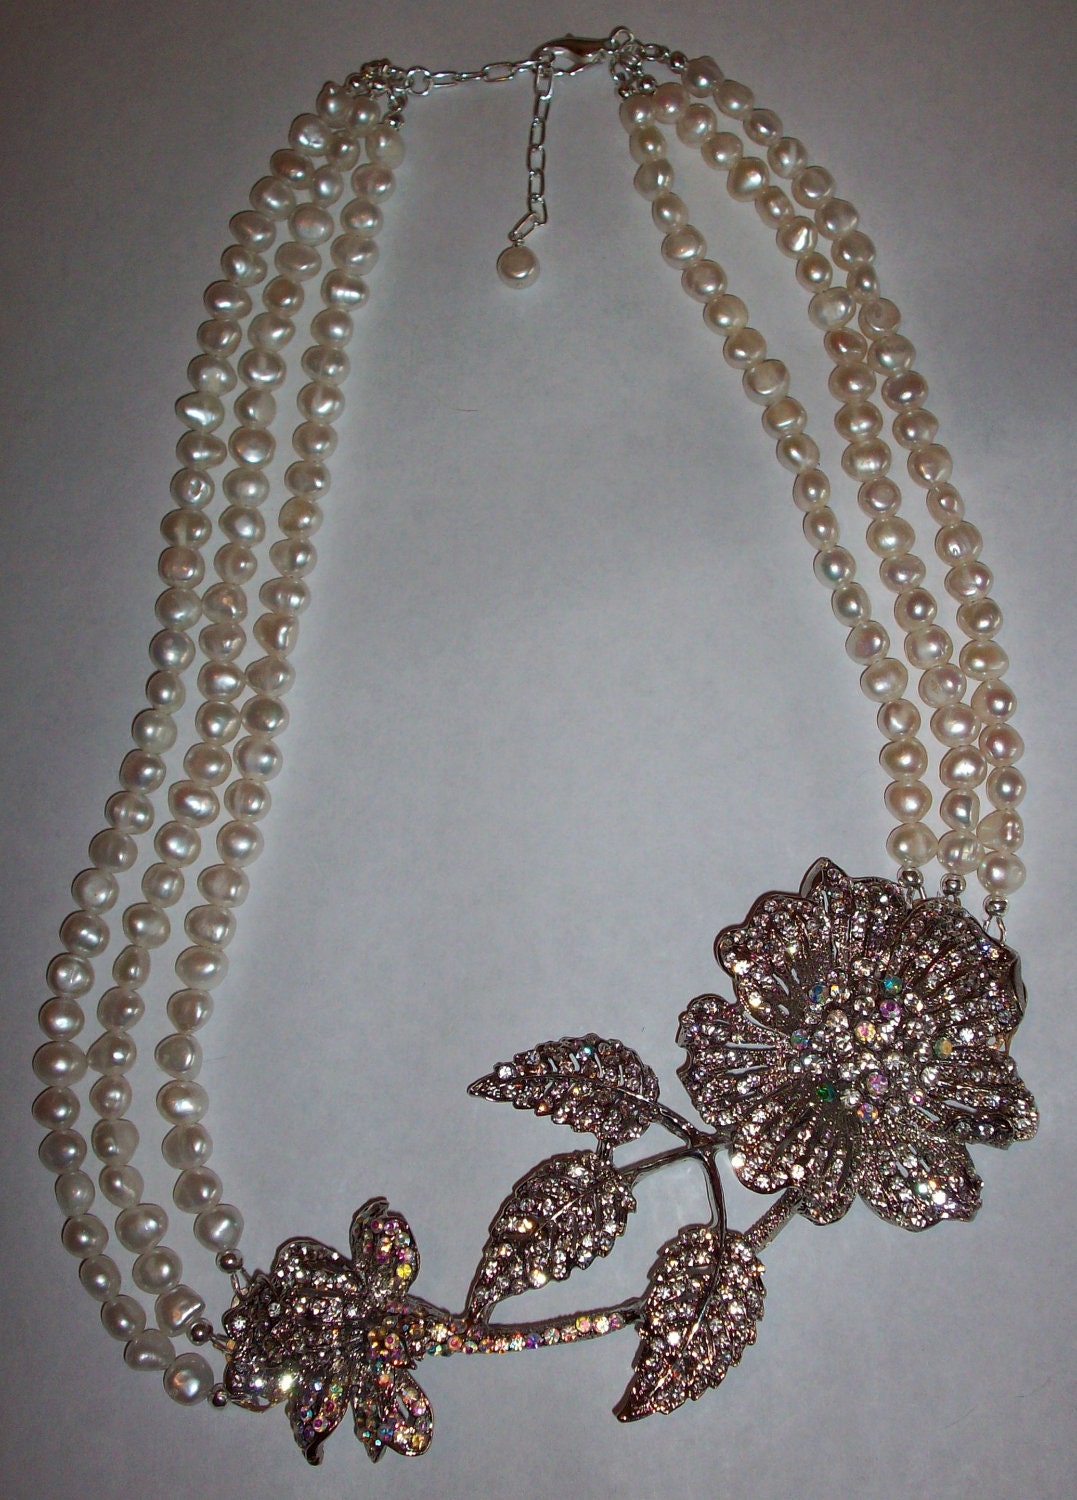 SALE 30% Off-Unique One of a Kind Huge Rhinestone Flower Freshwater Pearl Necklace Gifts under 100